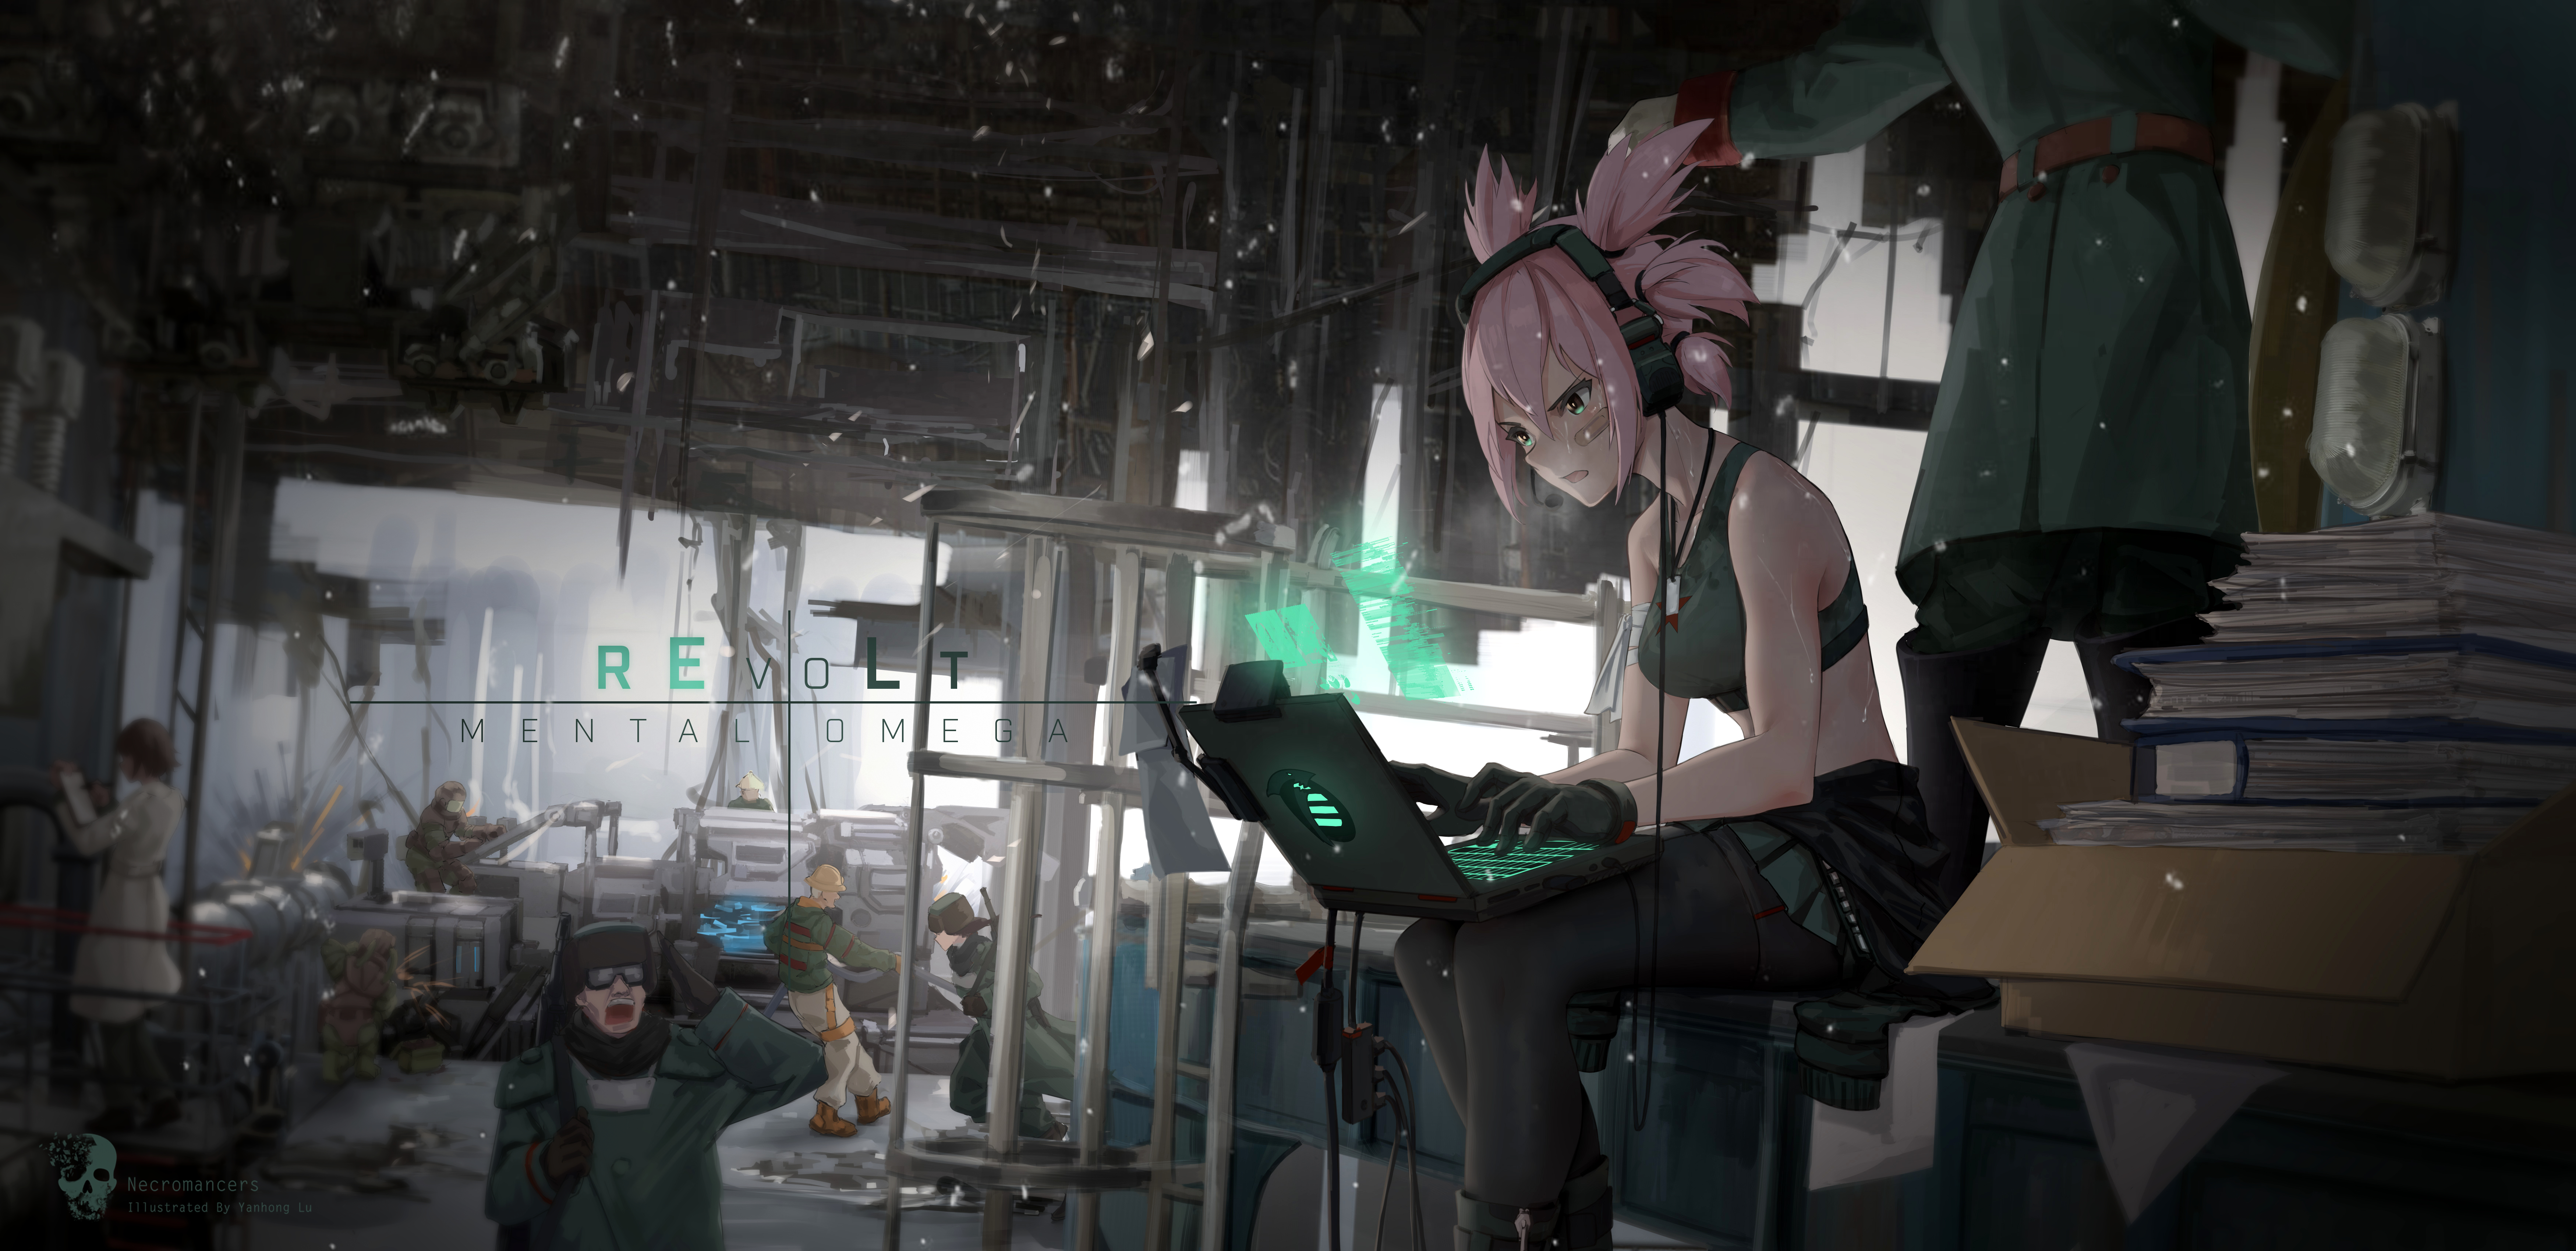 Mental Omega Yunru Mental Omega Red Alert 2 Command Conquer Pink Hair Anime Girls Gloves Laptop Shor 7000x3400